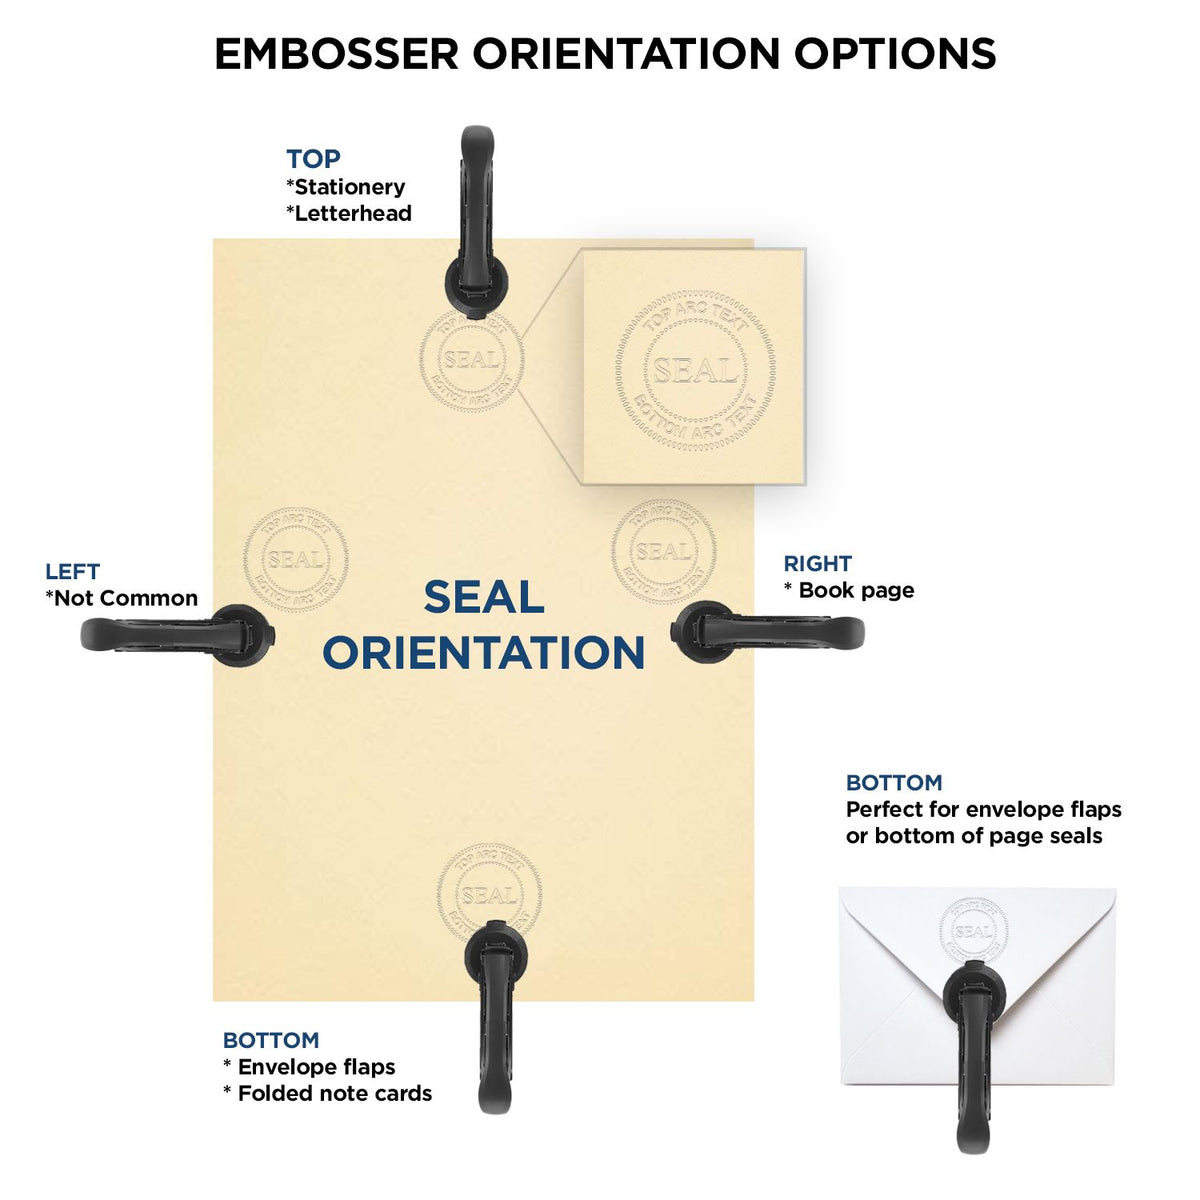 An infographic for the South Carolina Engineer Desk Seal showing embosser orientation, this is showing examples of a top, bottom, right and left insert.